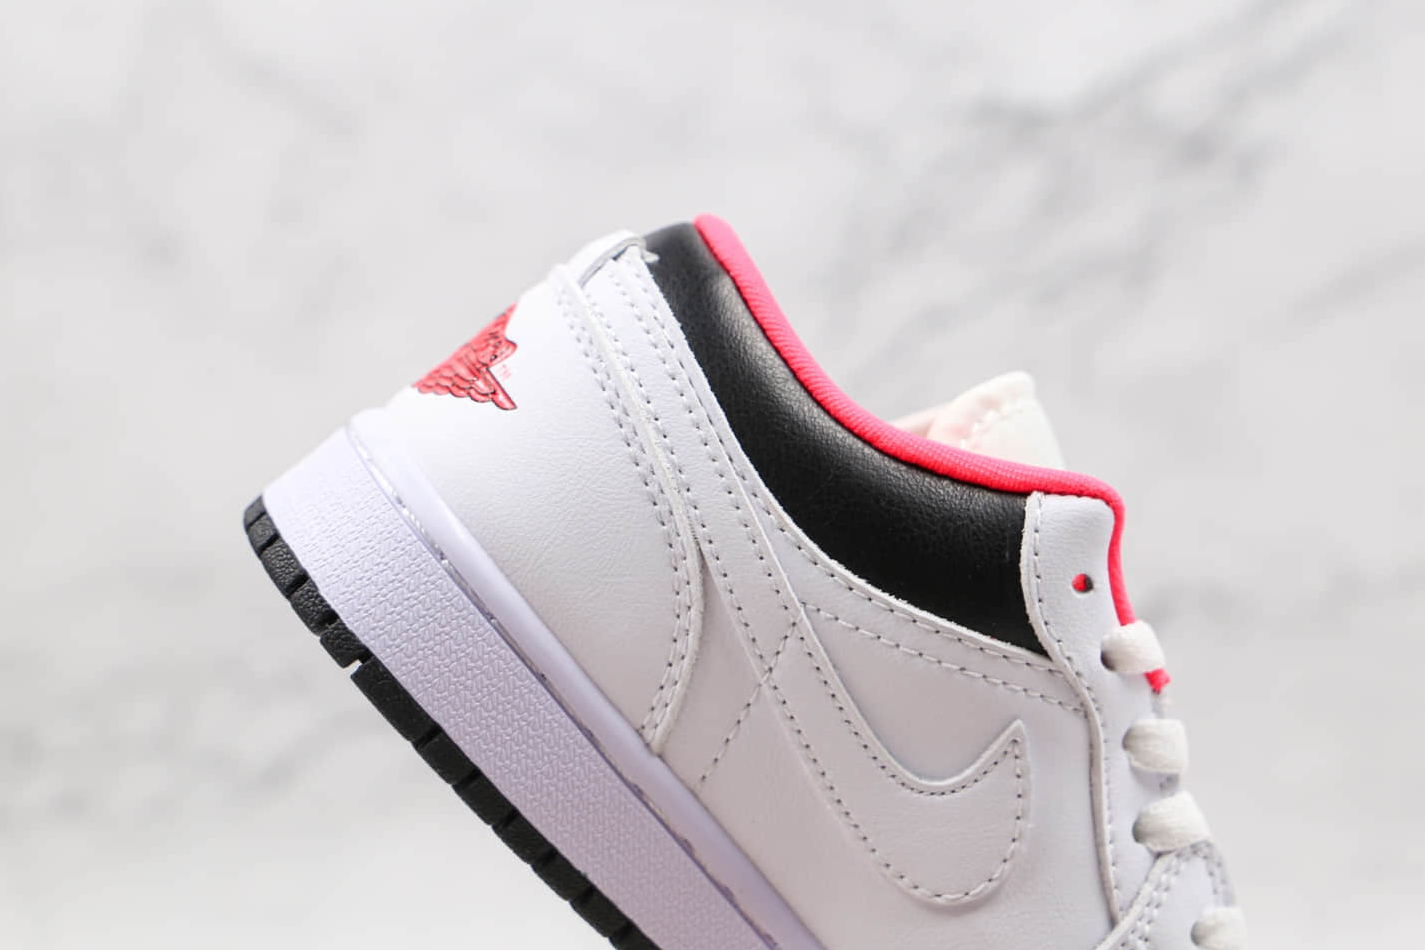 Air Jordan 1 Low 'Chicago Home' 553560-160 - Iconic Style & Unmatched Comfort!